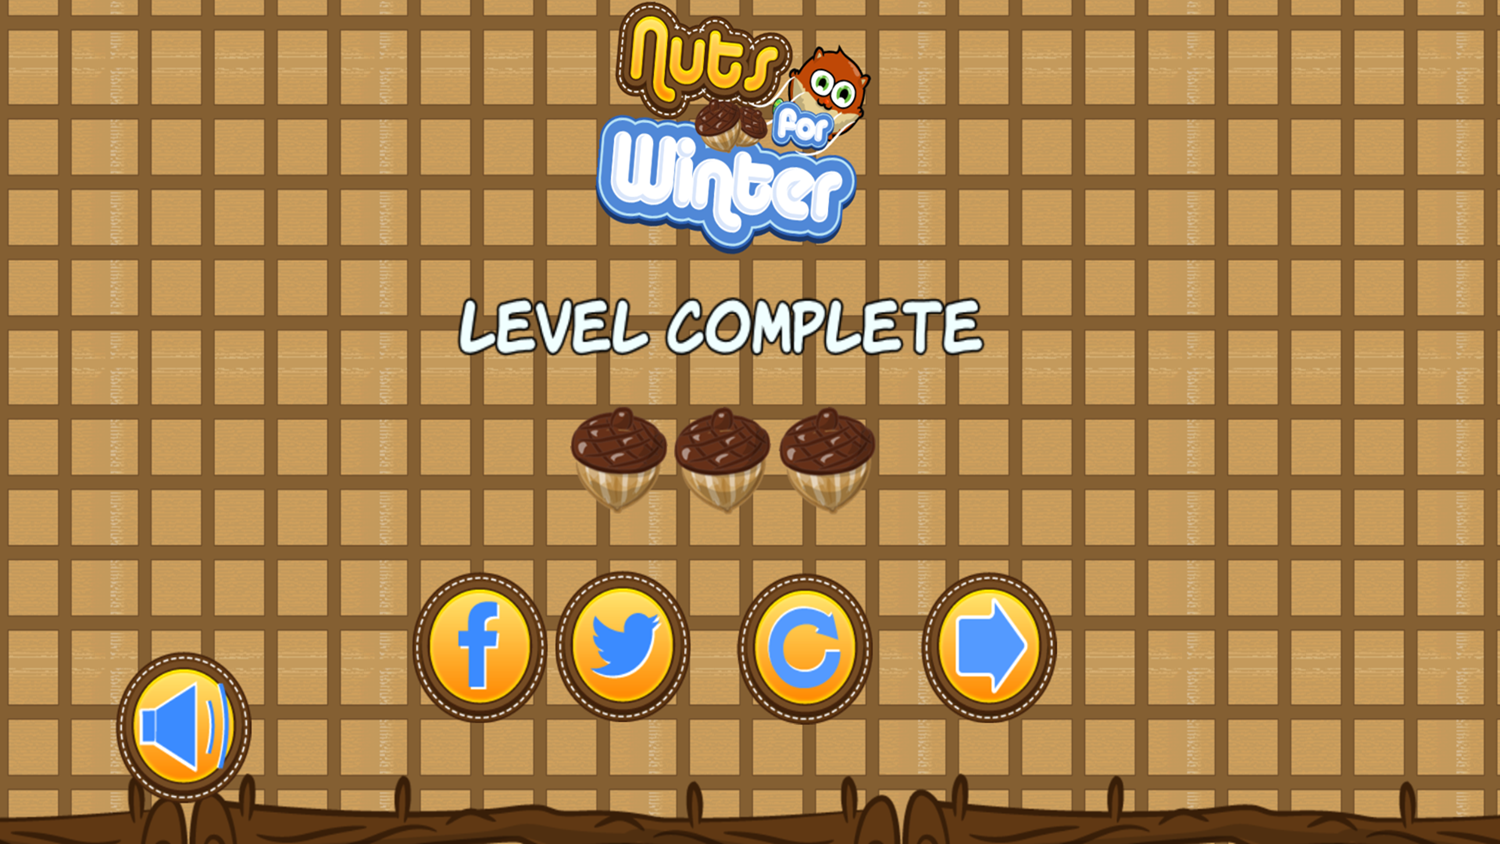 Nuts for Winter Game Level Complete Screenshot.